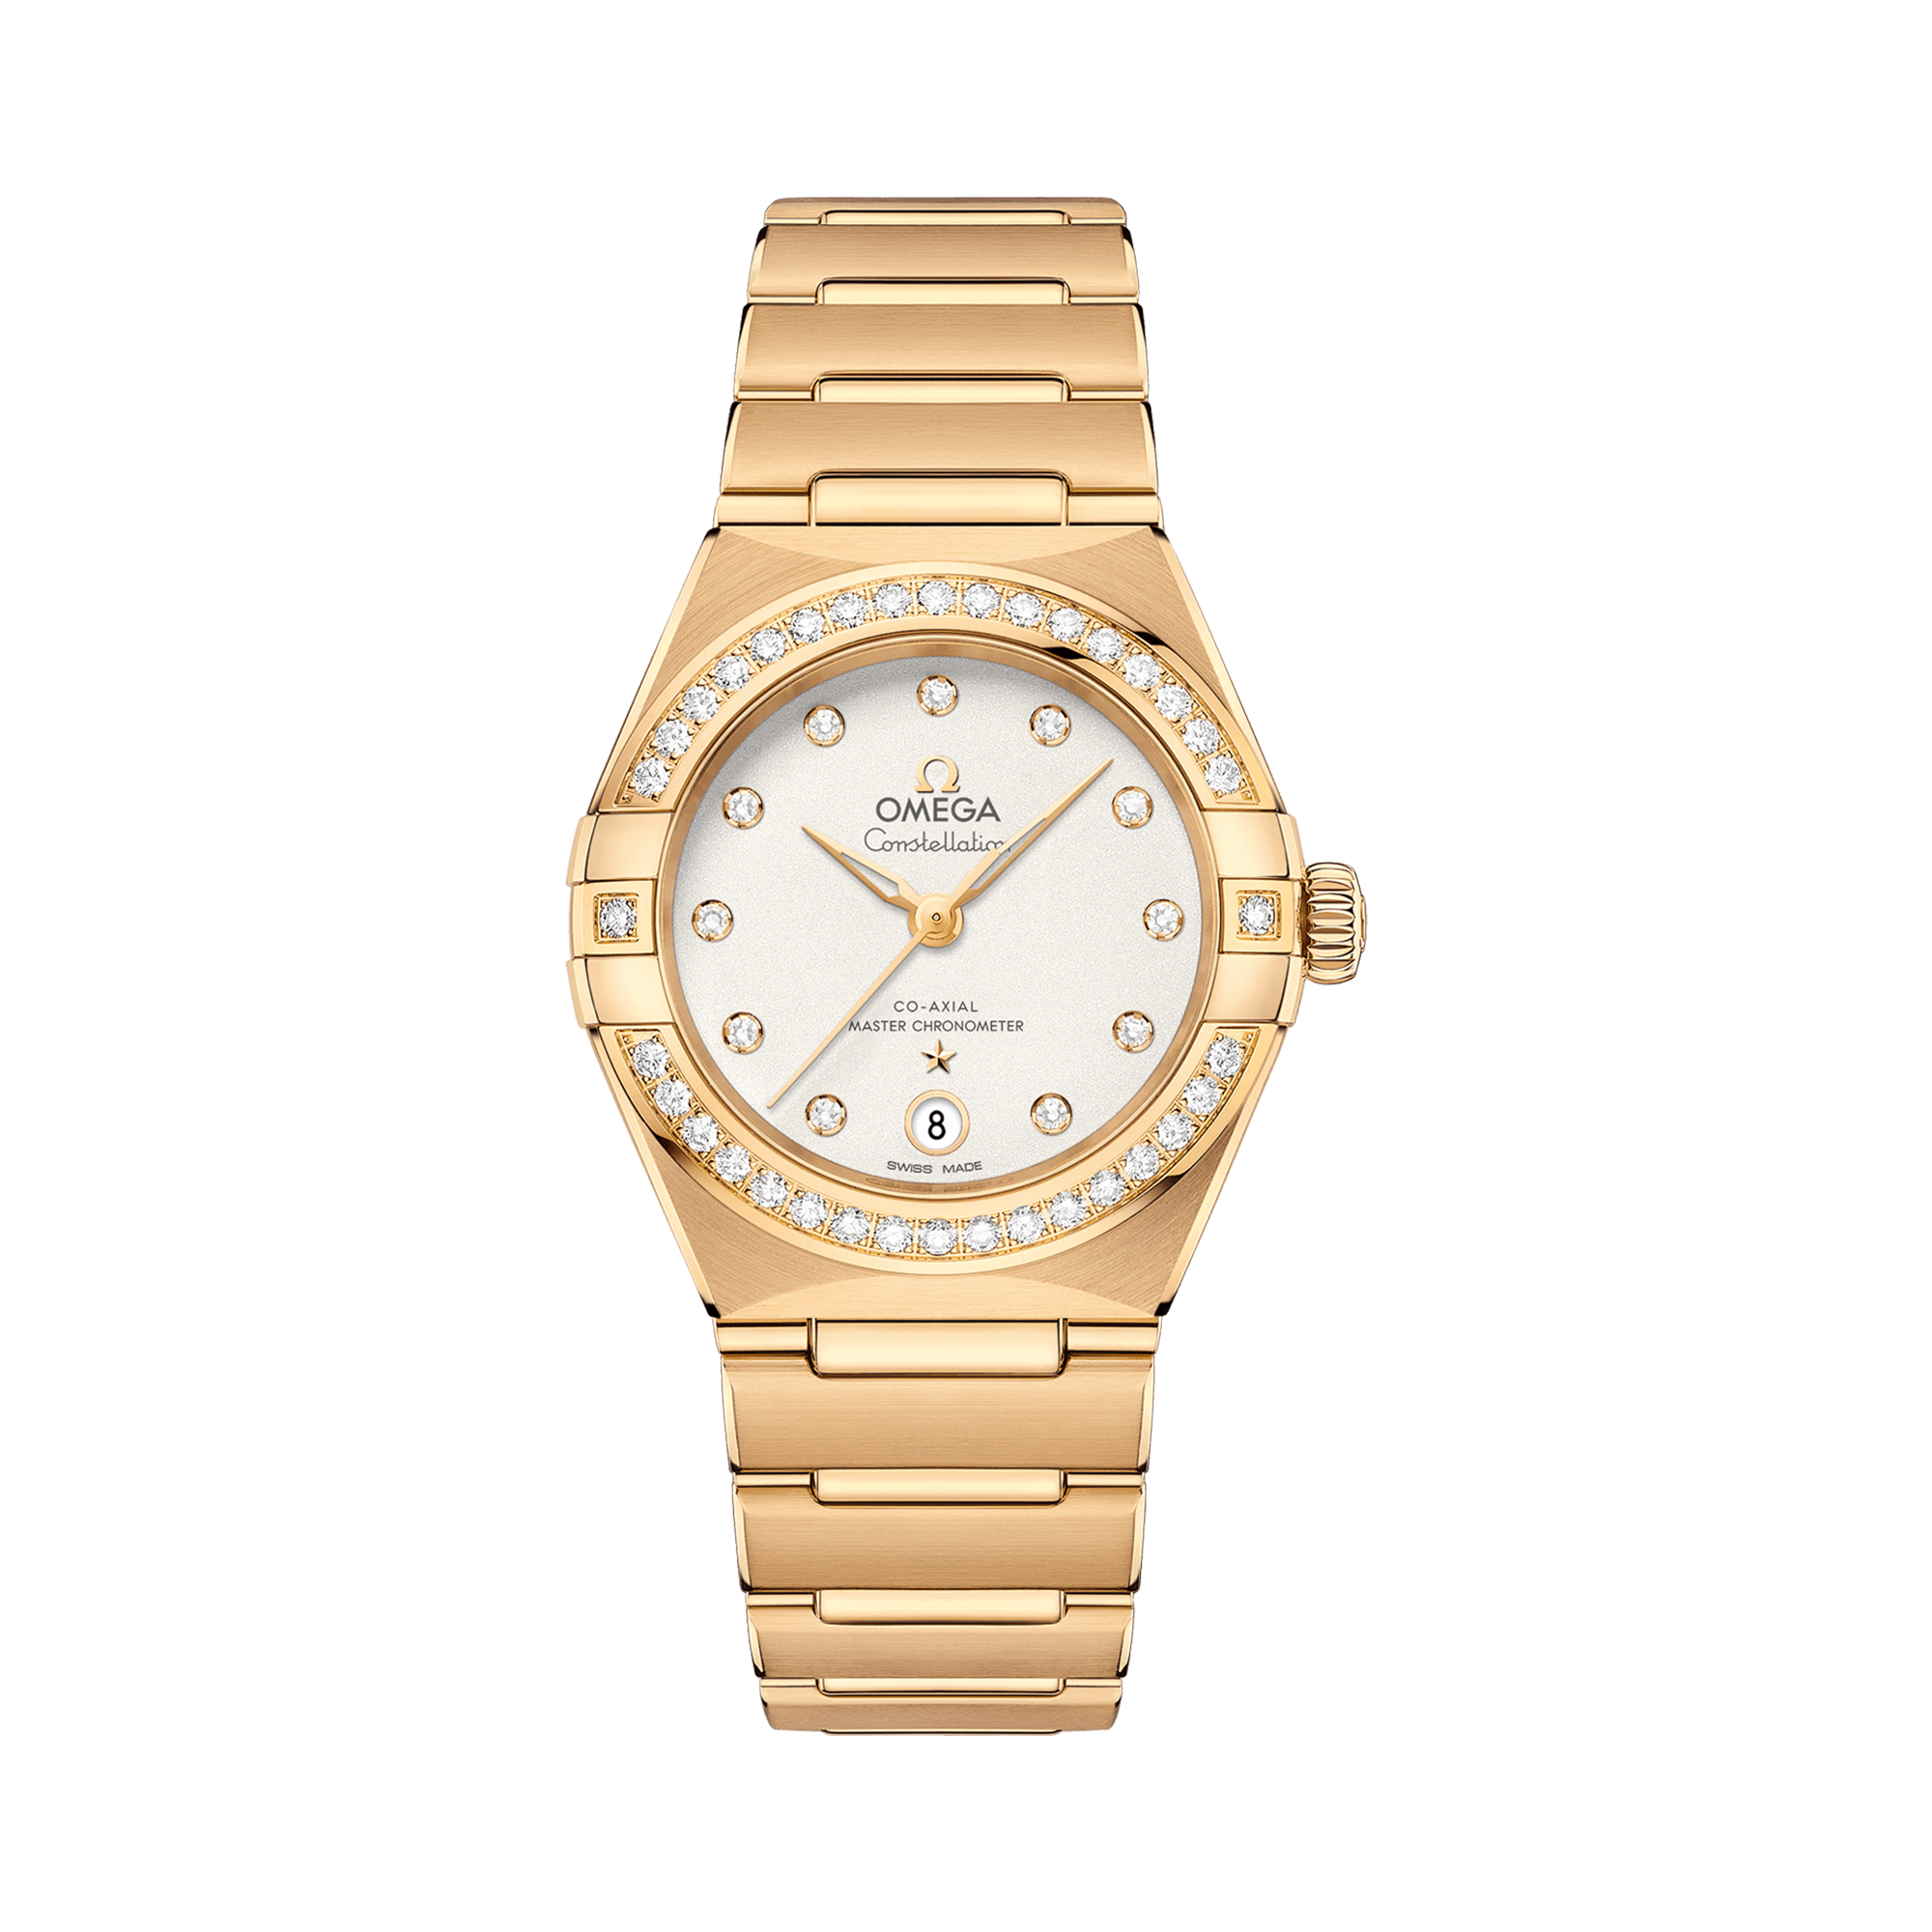 OMEGA Constellation 29mm, Silver dial, Diamond numerals_1